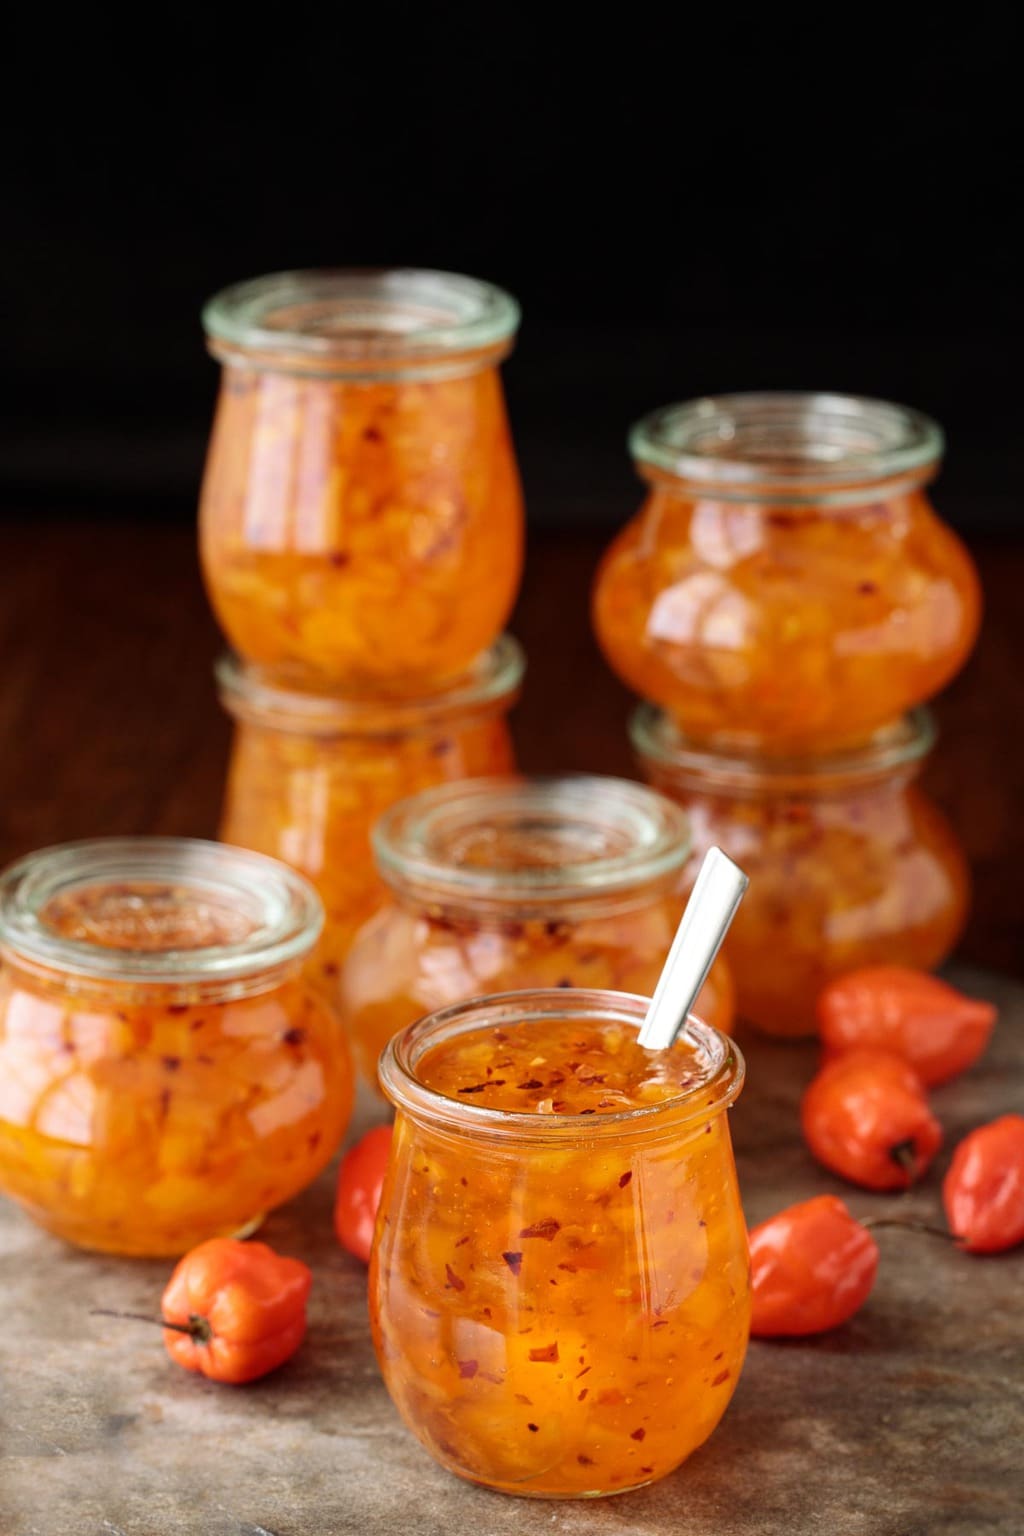 Picture of Pineapple Habanero Pepper Jelly in jars